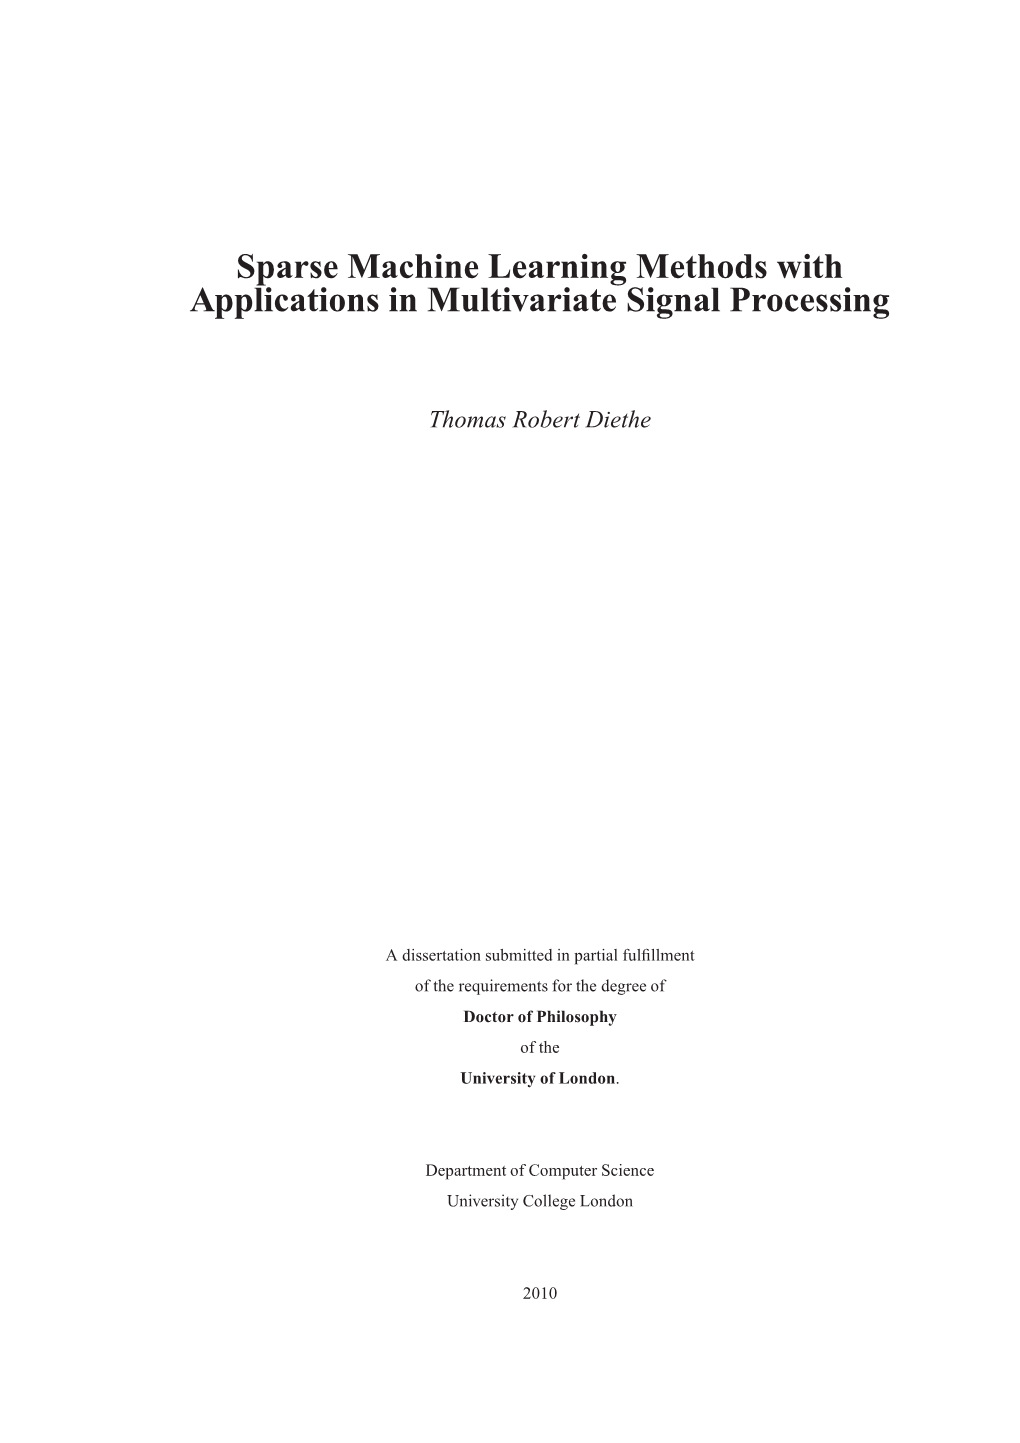 Sparse Machine Learning Methods with Applications in Multivariate Signal Processing